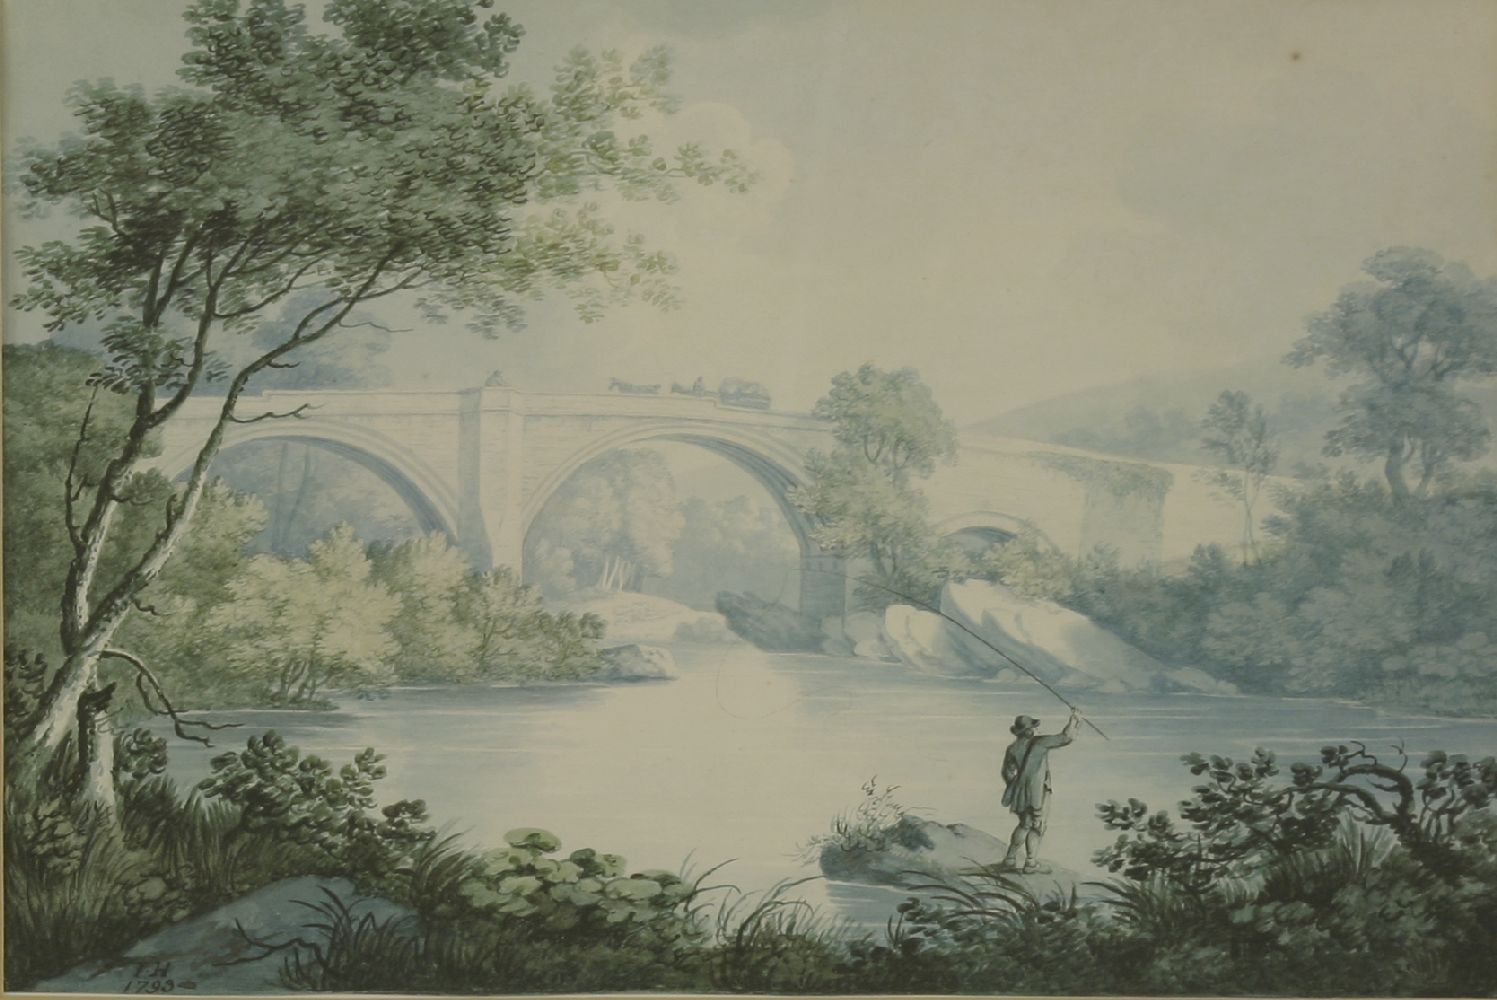 Joseph Halfpenny (1748-1811)BRIDGE WITH A FISHERMAN Signed with initials and dated 1793 l.l.,